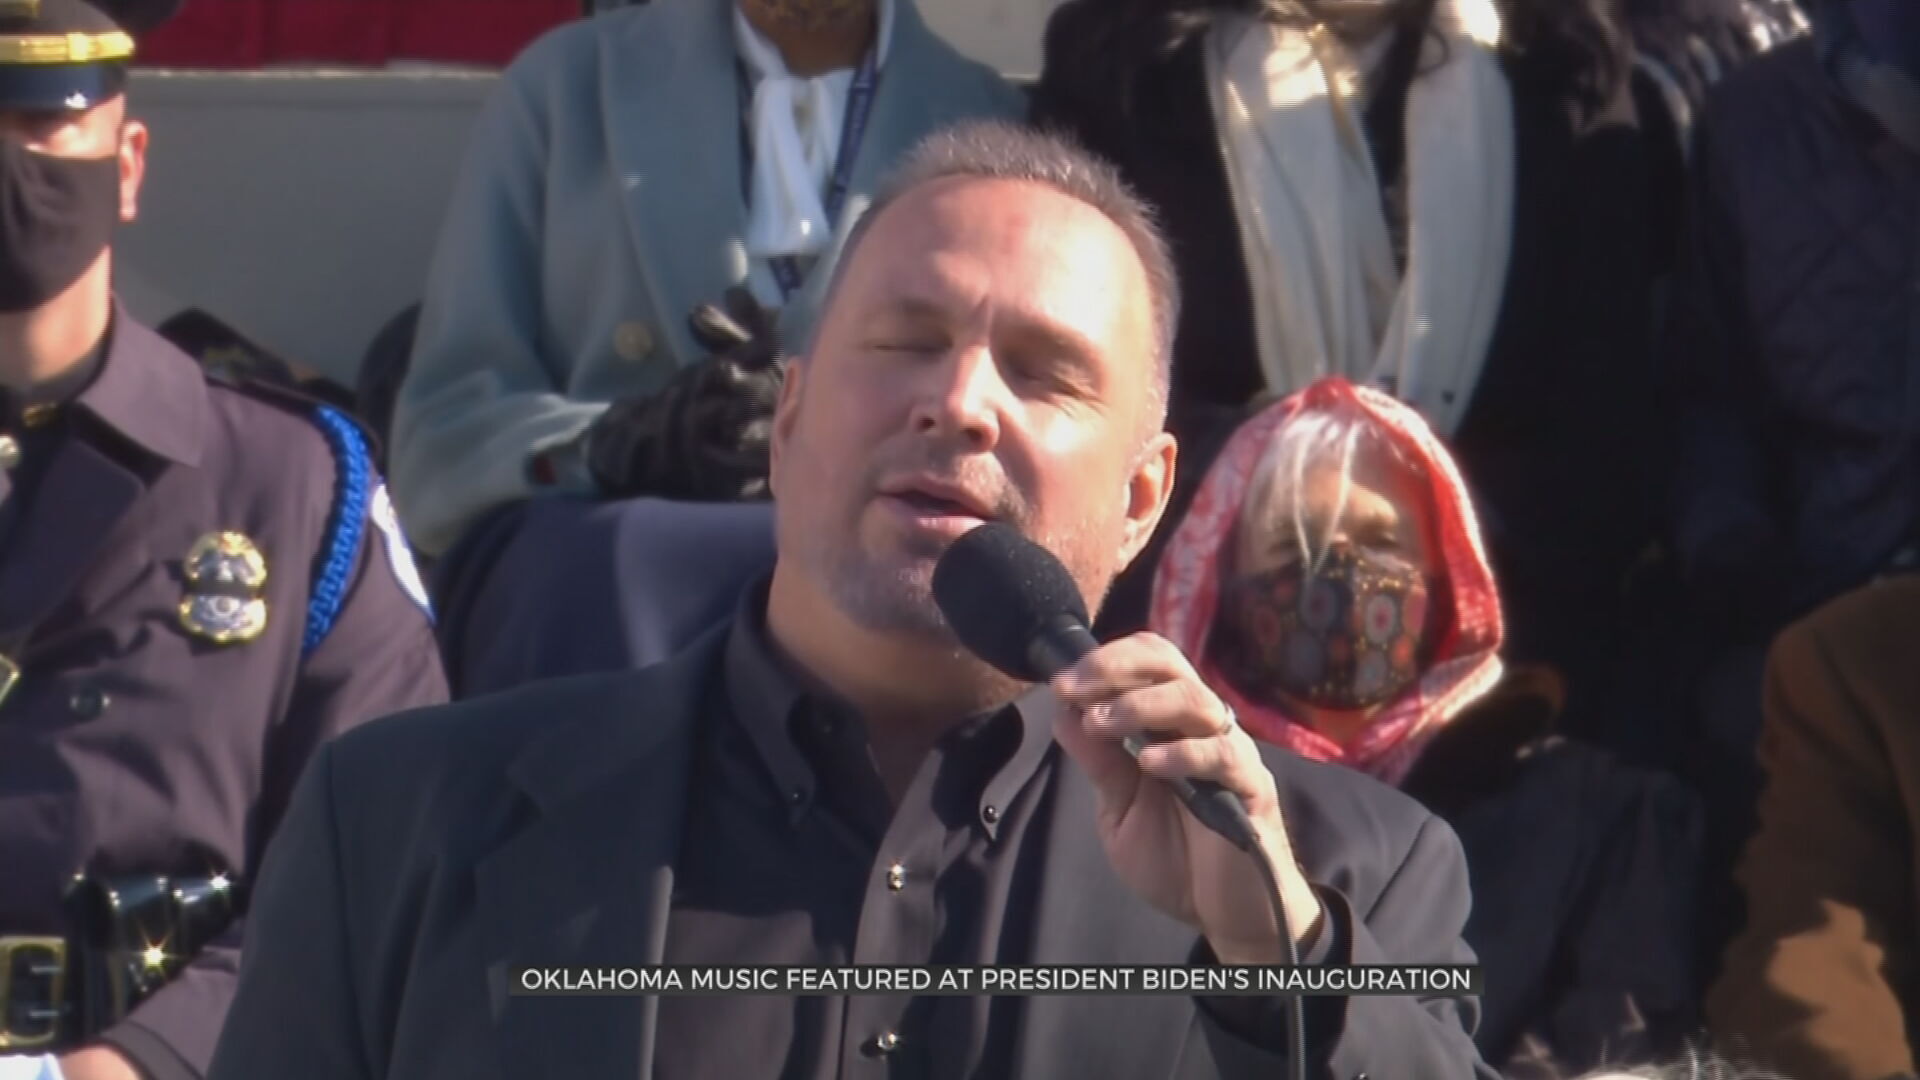 Oklahomans Prominently Featured In Music At Presidential Inauguration 